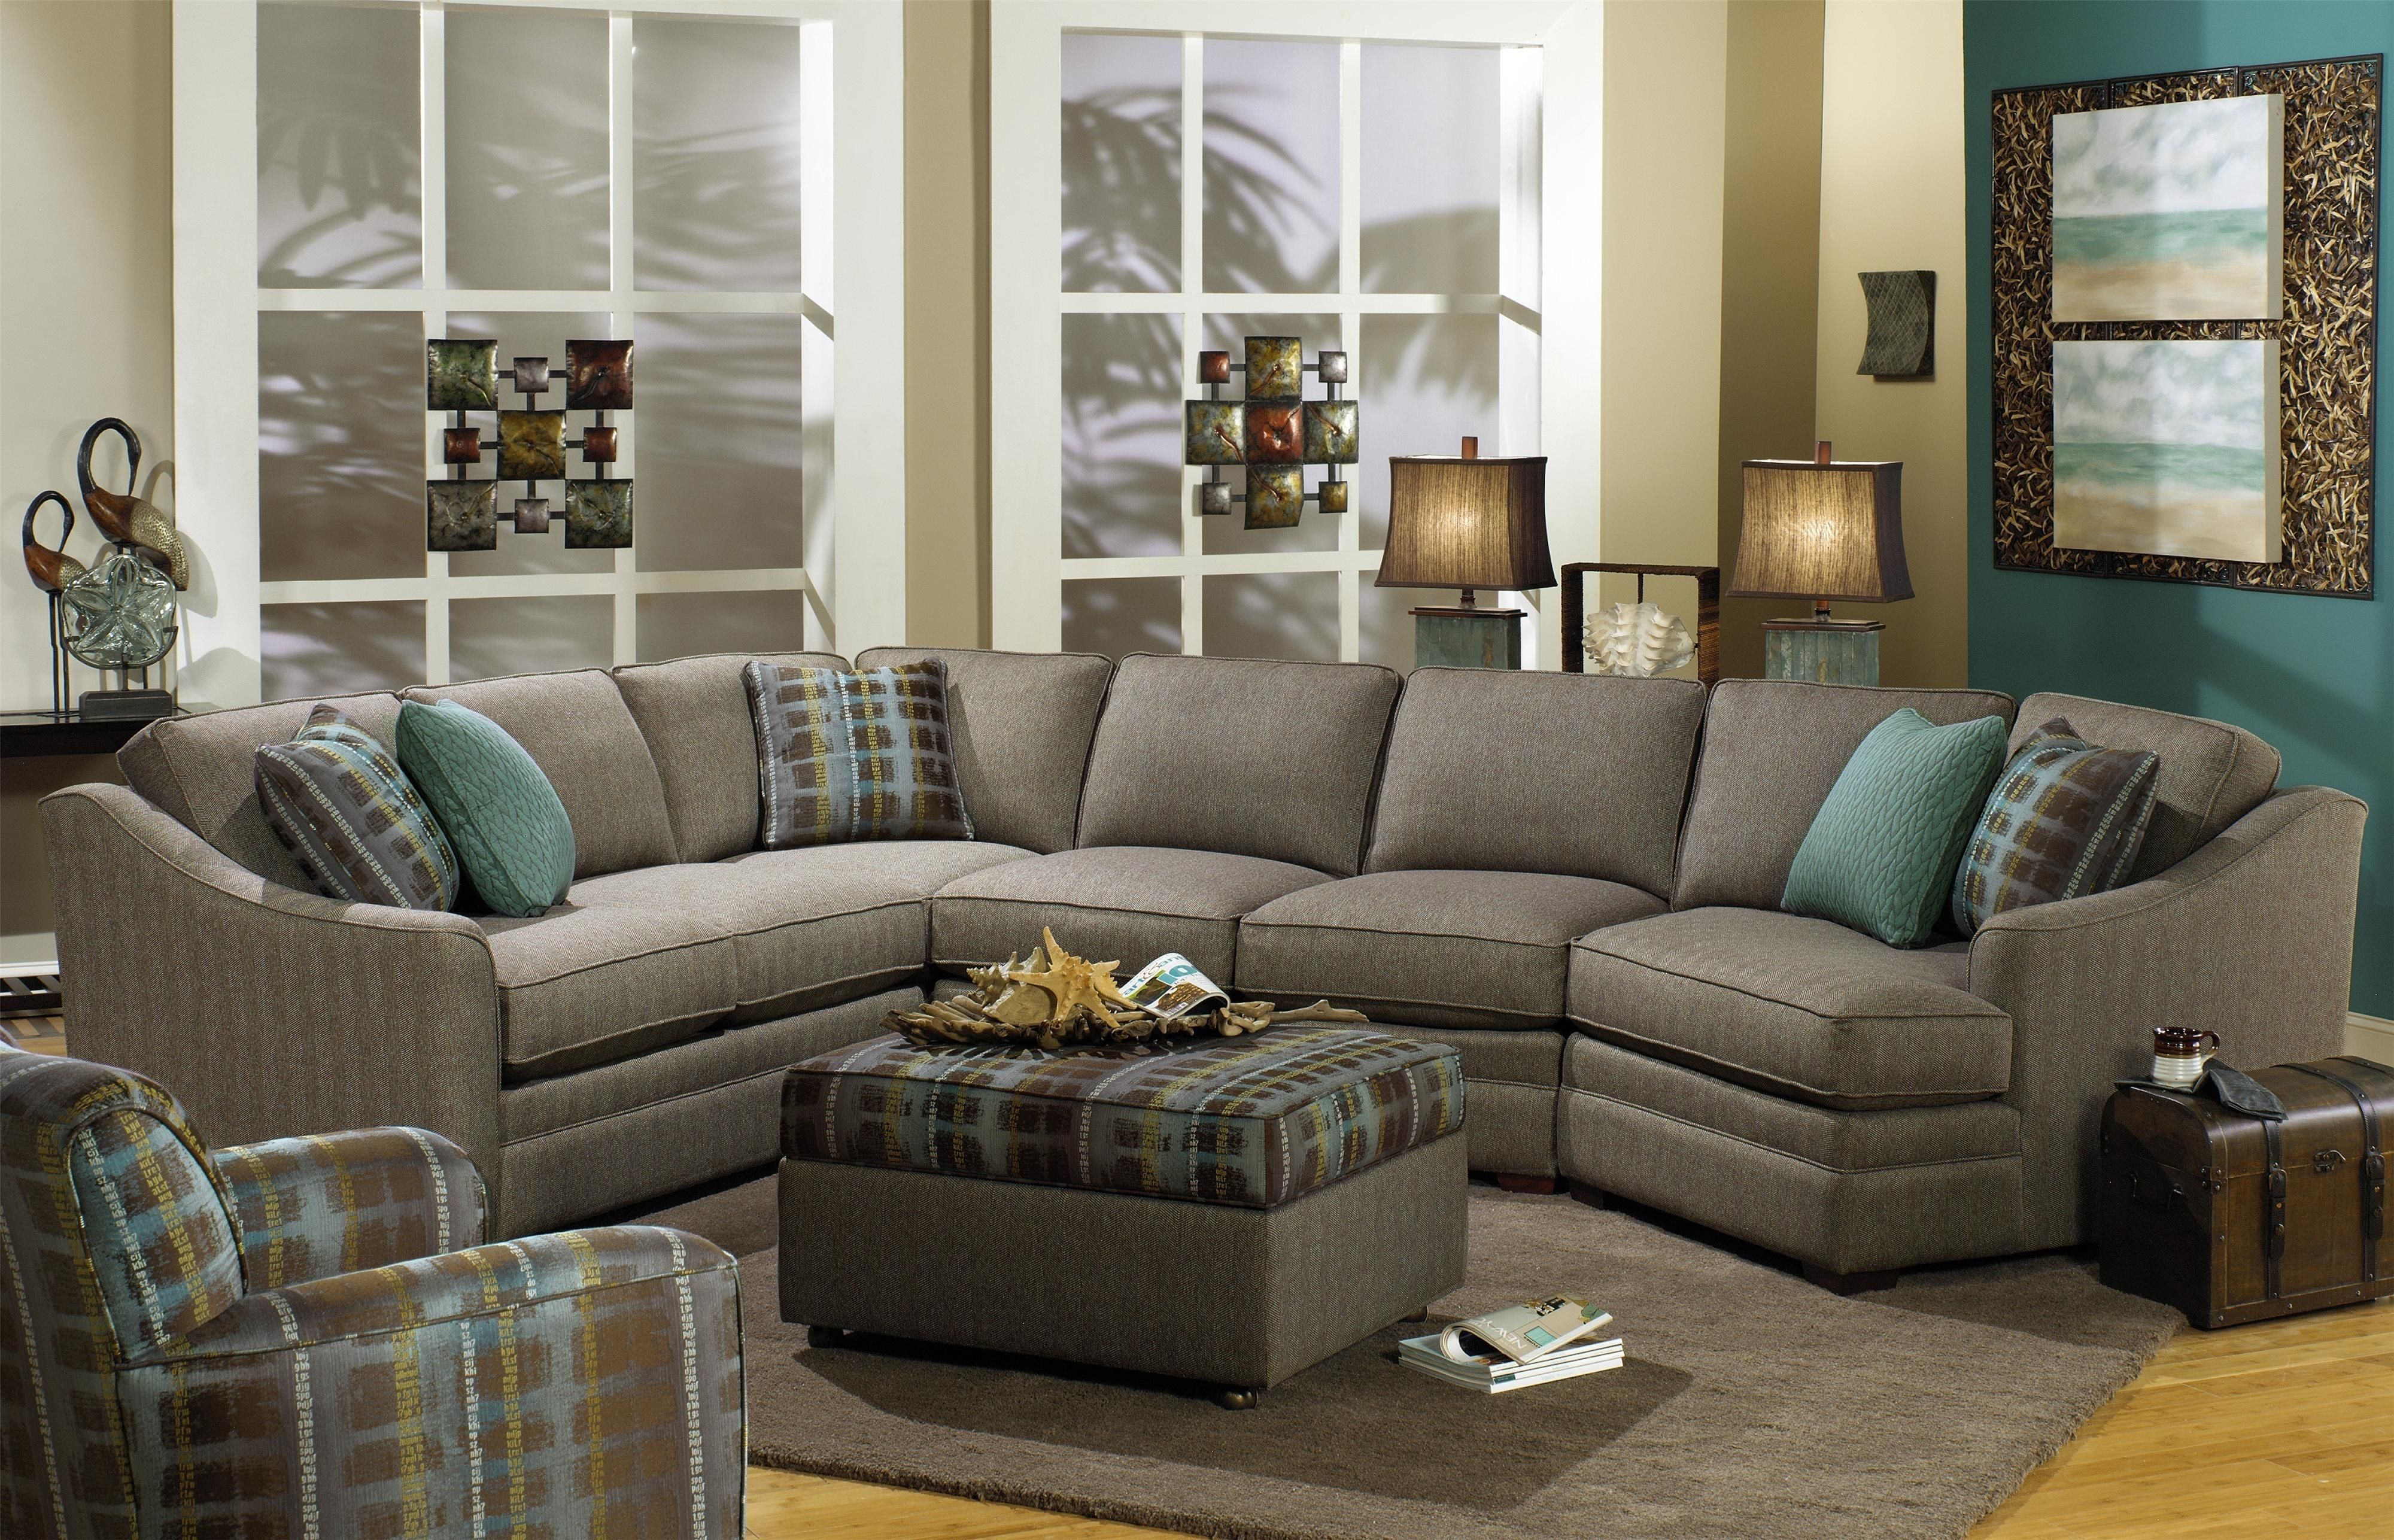 F9 Custom Collection Customizable 3 Piece Sectional With Laf Cuddler Inside Pensacola Fl Sectional Sofas (View 10 of 10)